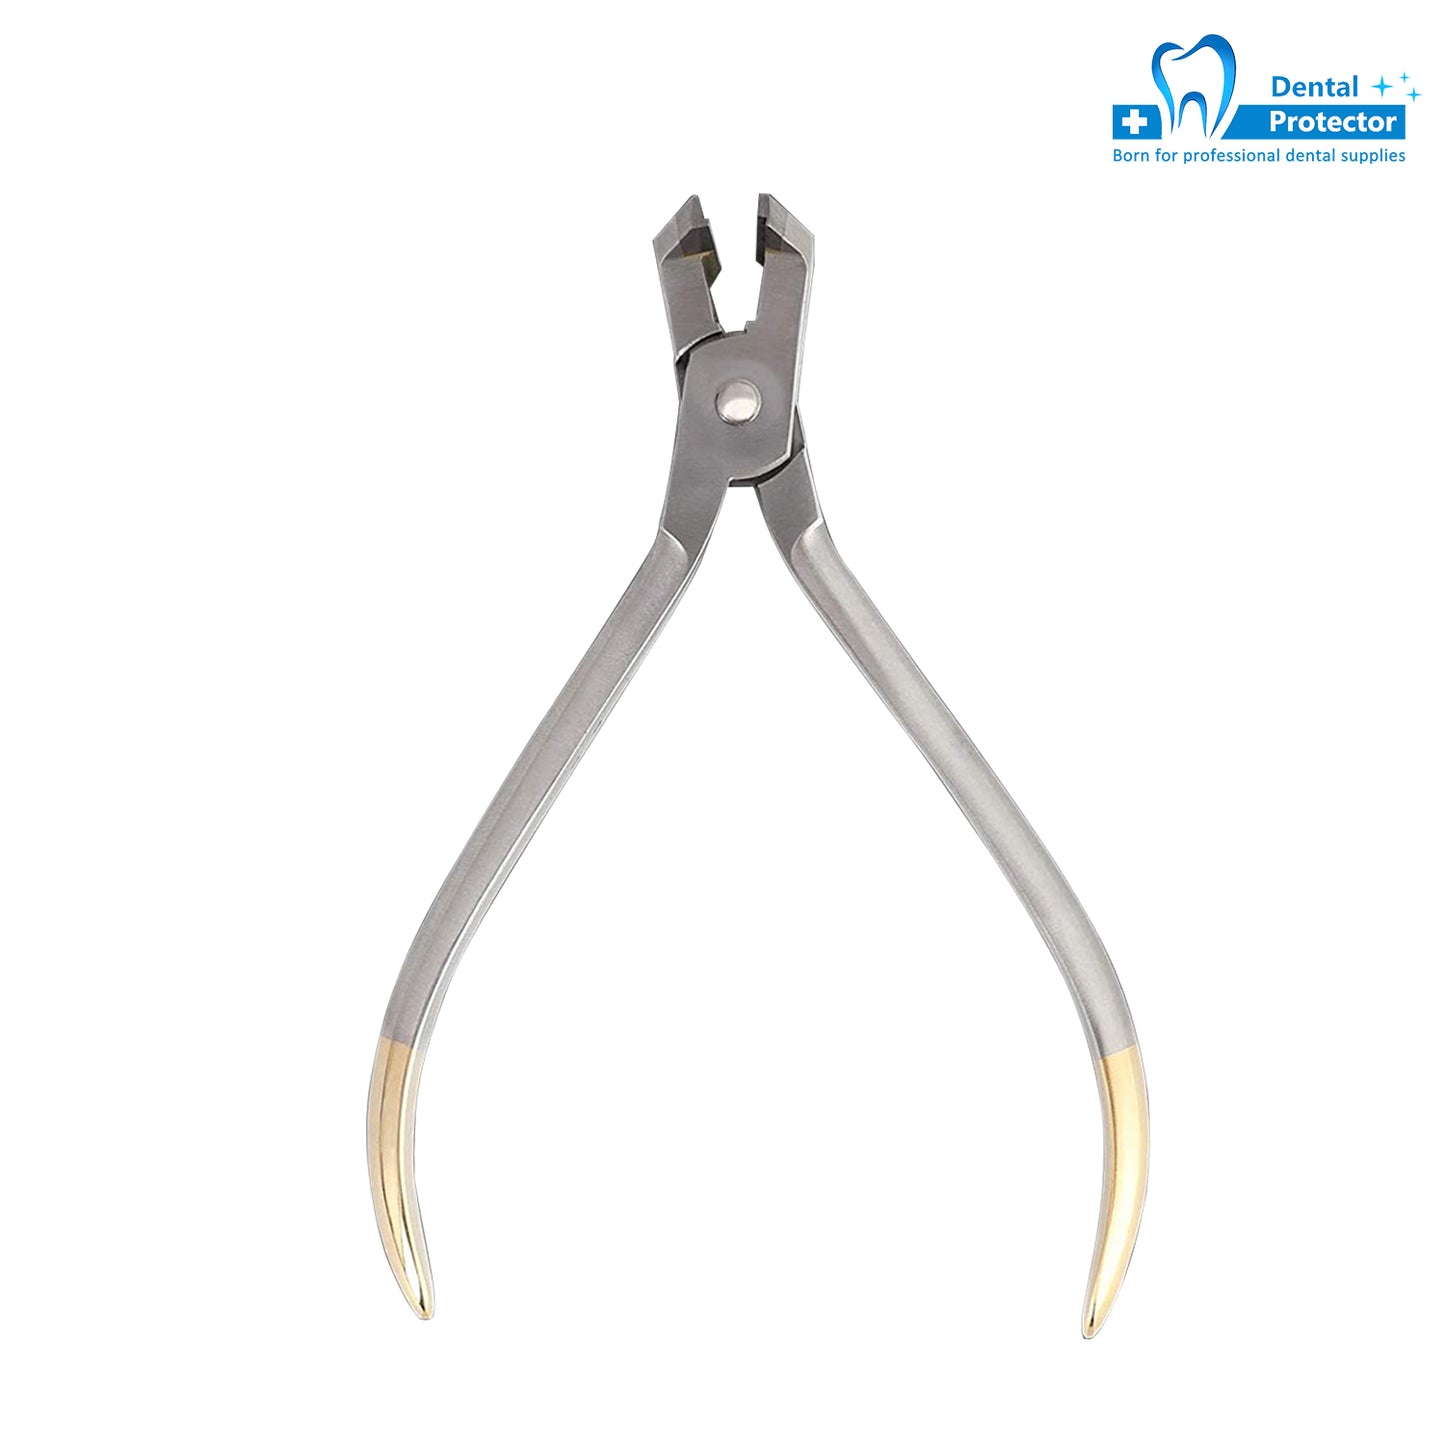 Distal End Cut Plier, Hold & Cut Hard and Soft Wire Orthodontic Cutter Dental Surgical Instrument Tool - Braces Removal Tools Tooth Pulling Kit for Dentist